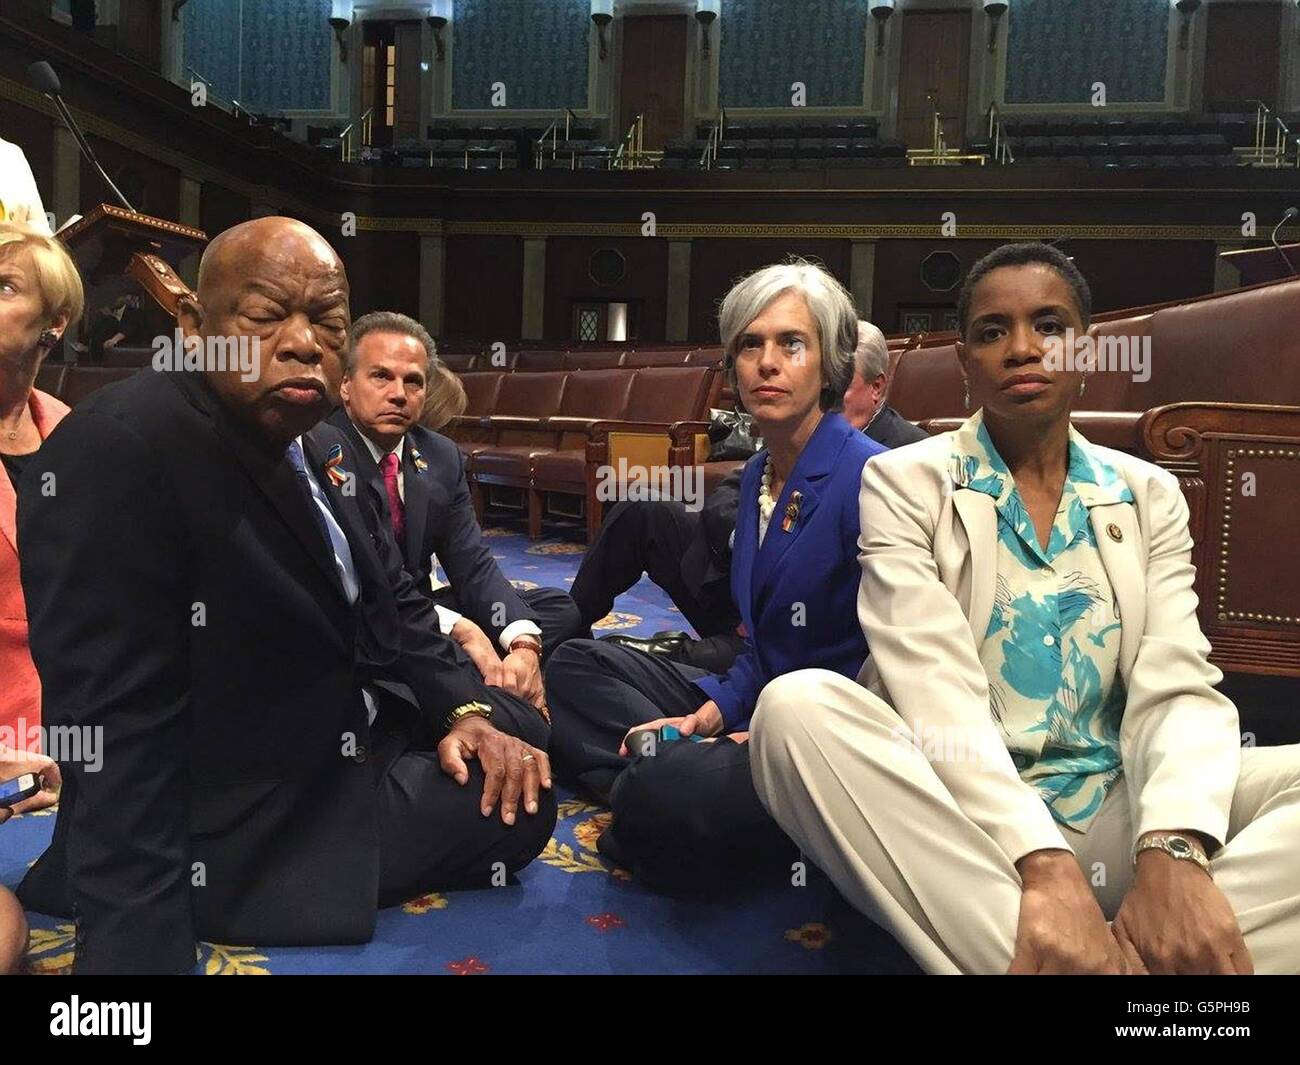 Washington DC., USA. 22nd June, 2016. U.S Rep. John Lewis, sitting left, leads a group of Democrats from the House and Senate to stage a sit in on the floor of the U.S House of Representatives demanding to vote on gun control legislation June 22, 2016 in Washington, DC. This is only the second time since 1970 that a party has staged a sit-in to demand a vote. Credit:  Planetpix/Alamy Live News Stock Photo